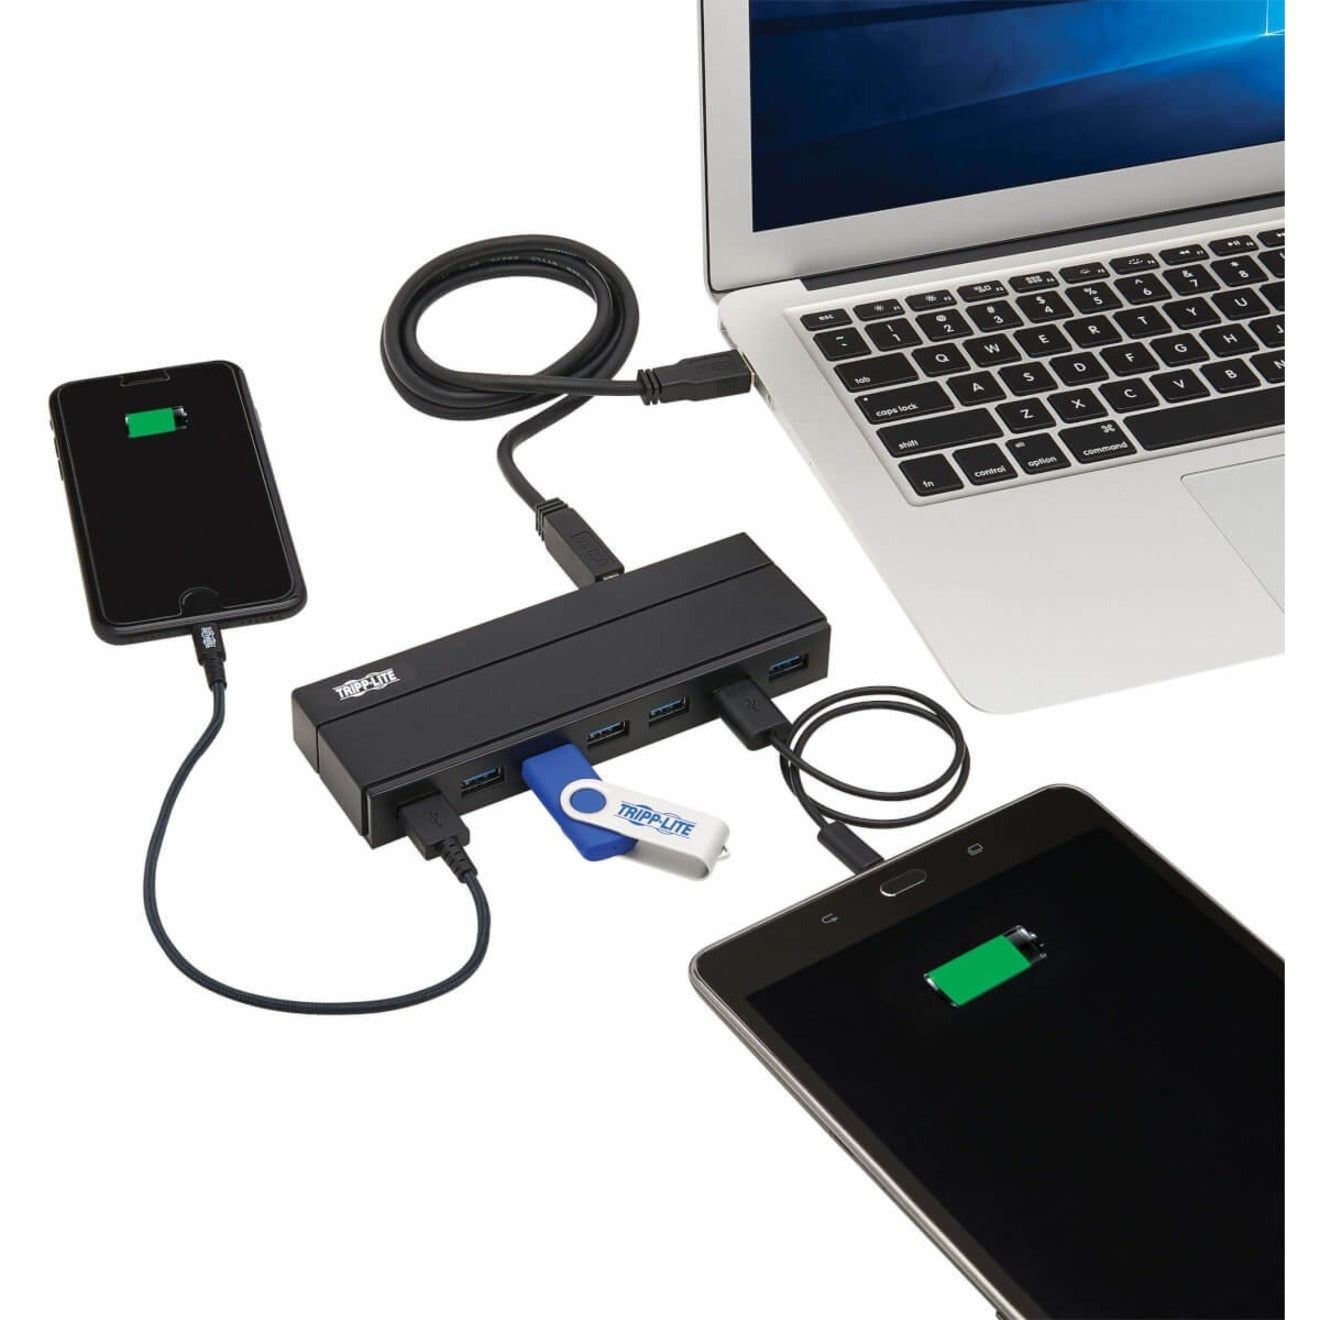 Tripp Lite U360-007 USB 3.0 Charging Hub - Expand Your USB Connectivity and Charge iPad 2